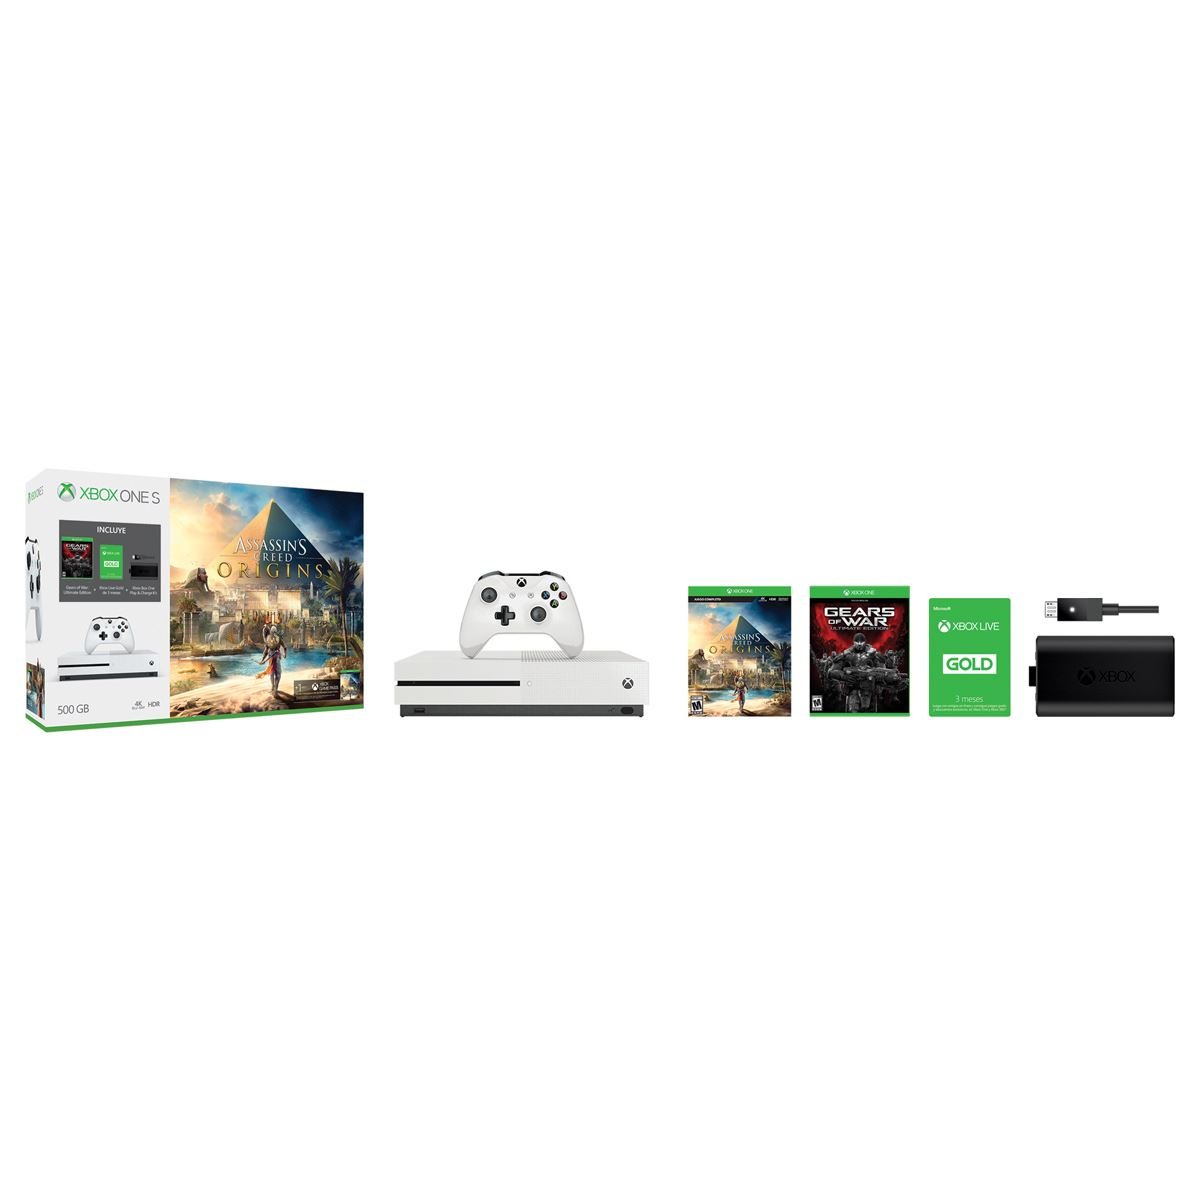 Consola  Xbox One S 500GB Assassins Creed